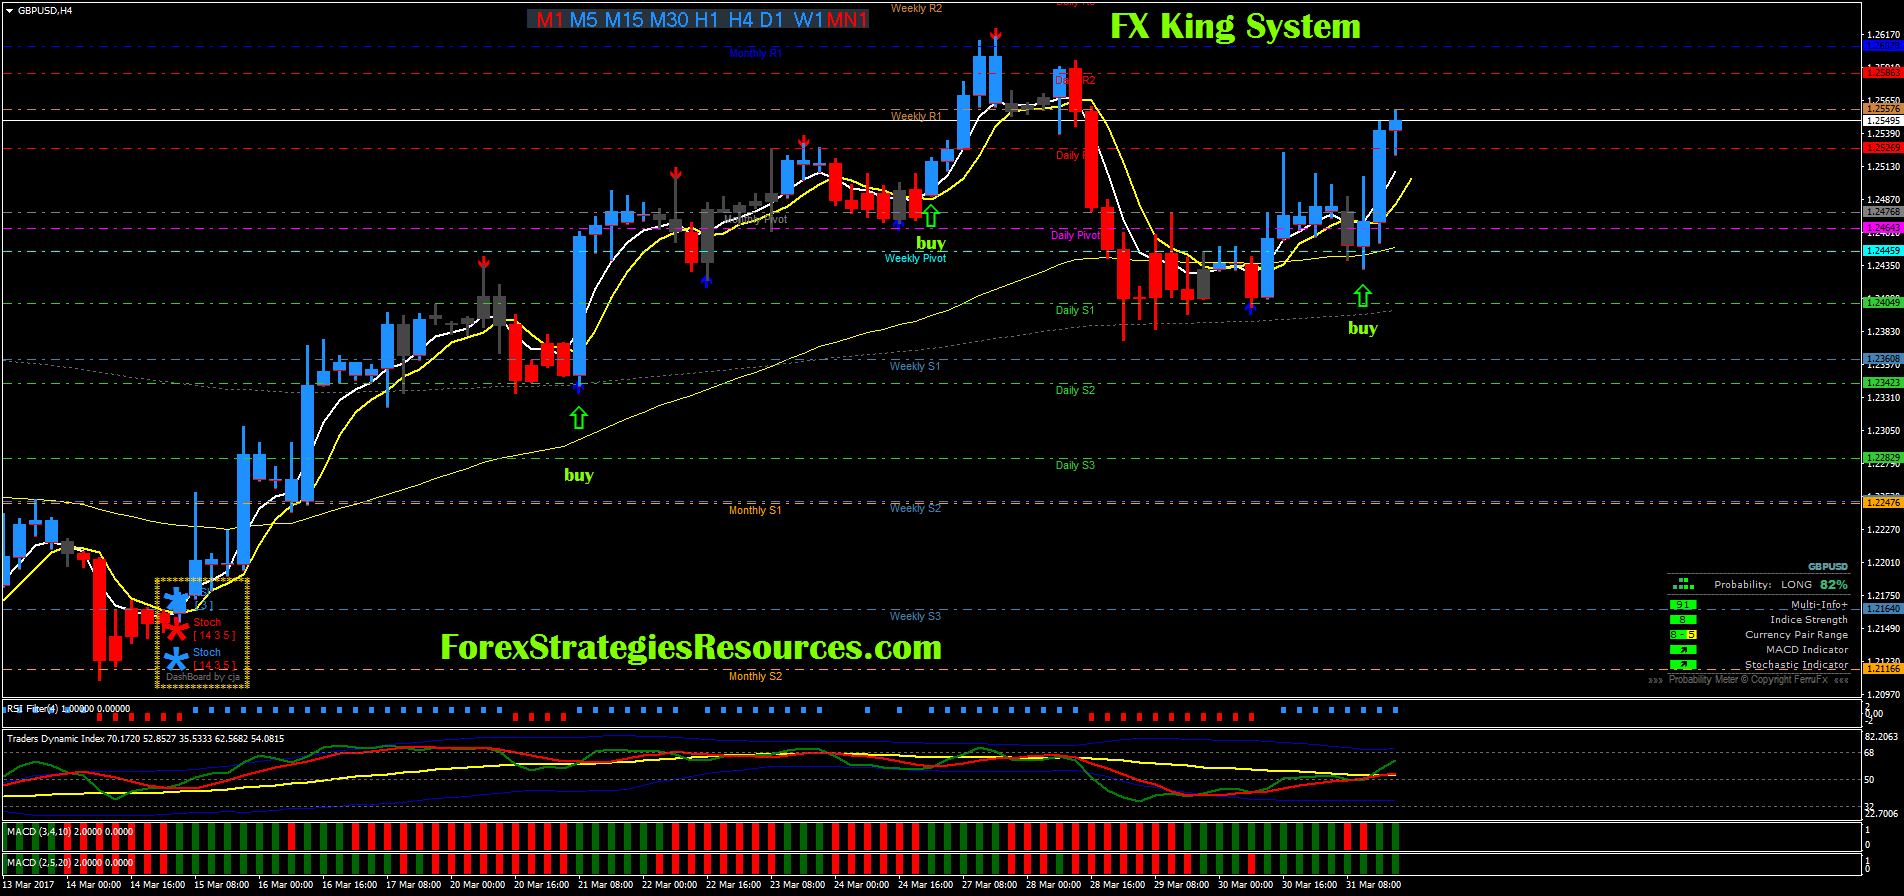 fx-king-system-forex-strategies-forex-resources-forex-trading